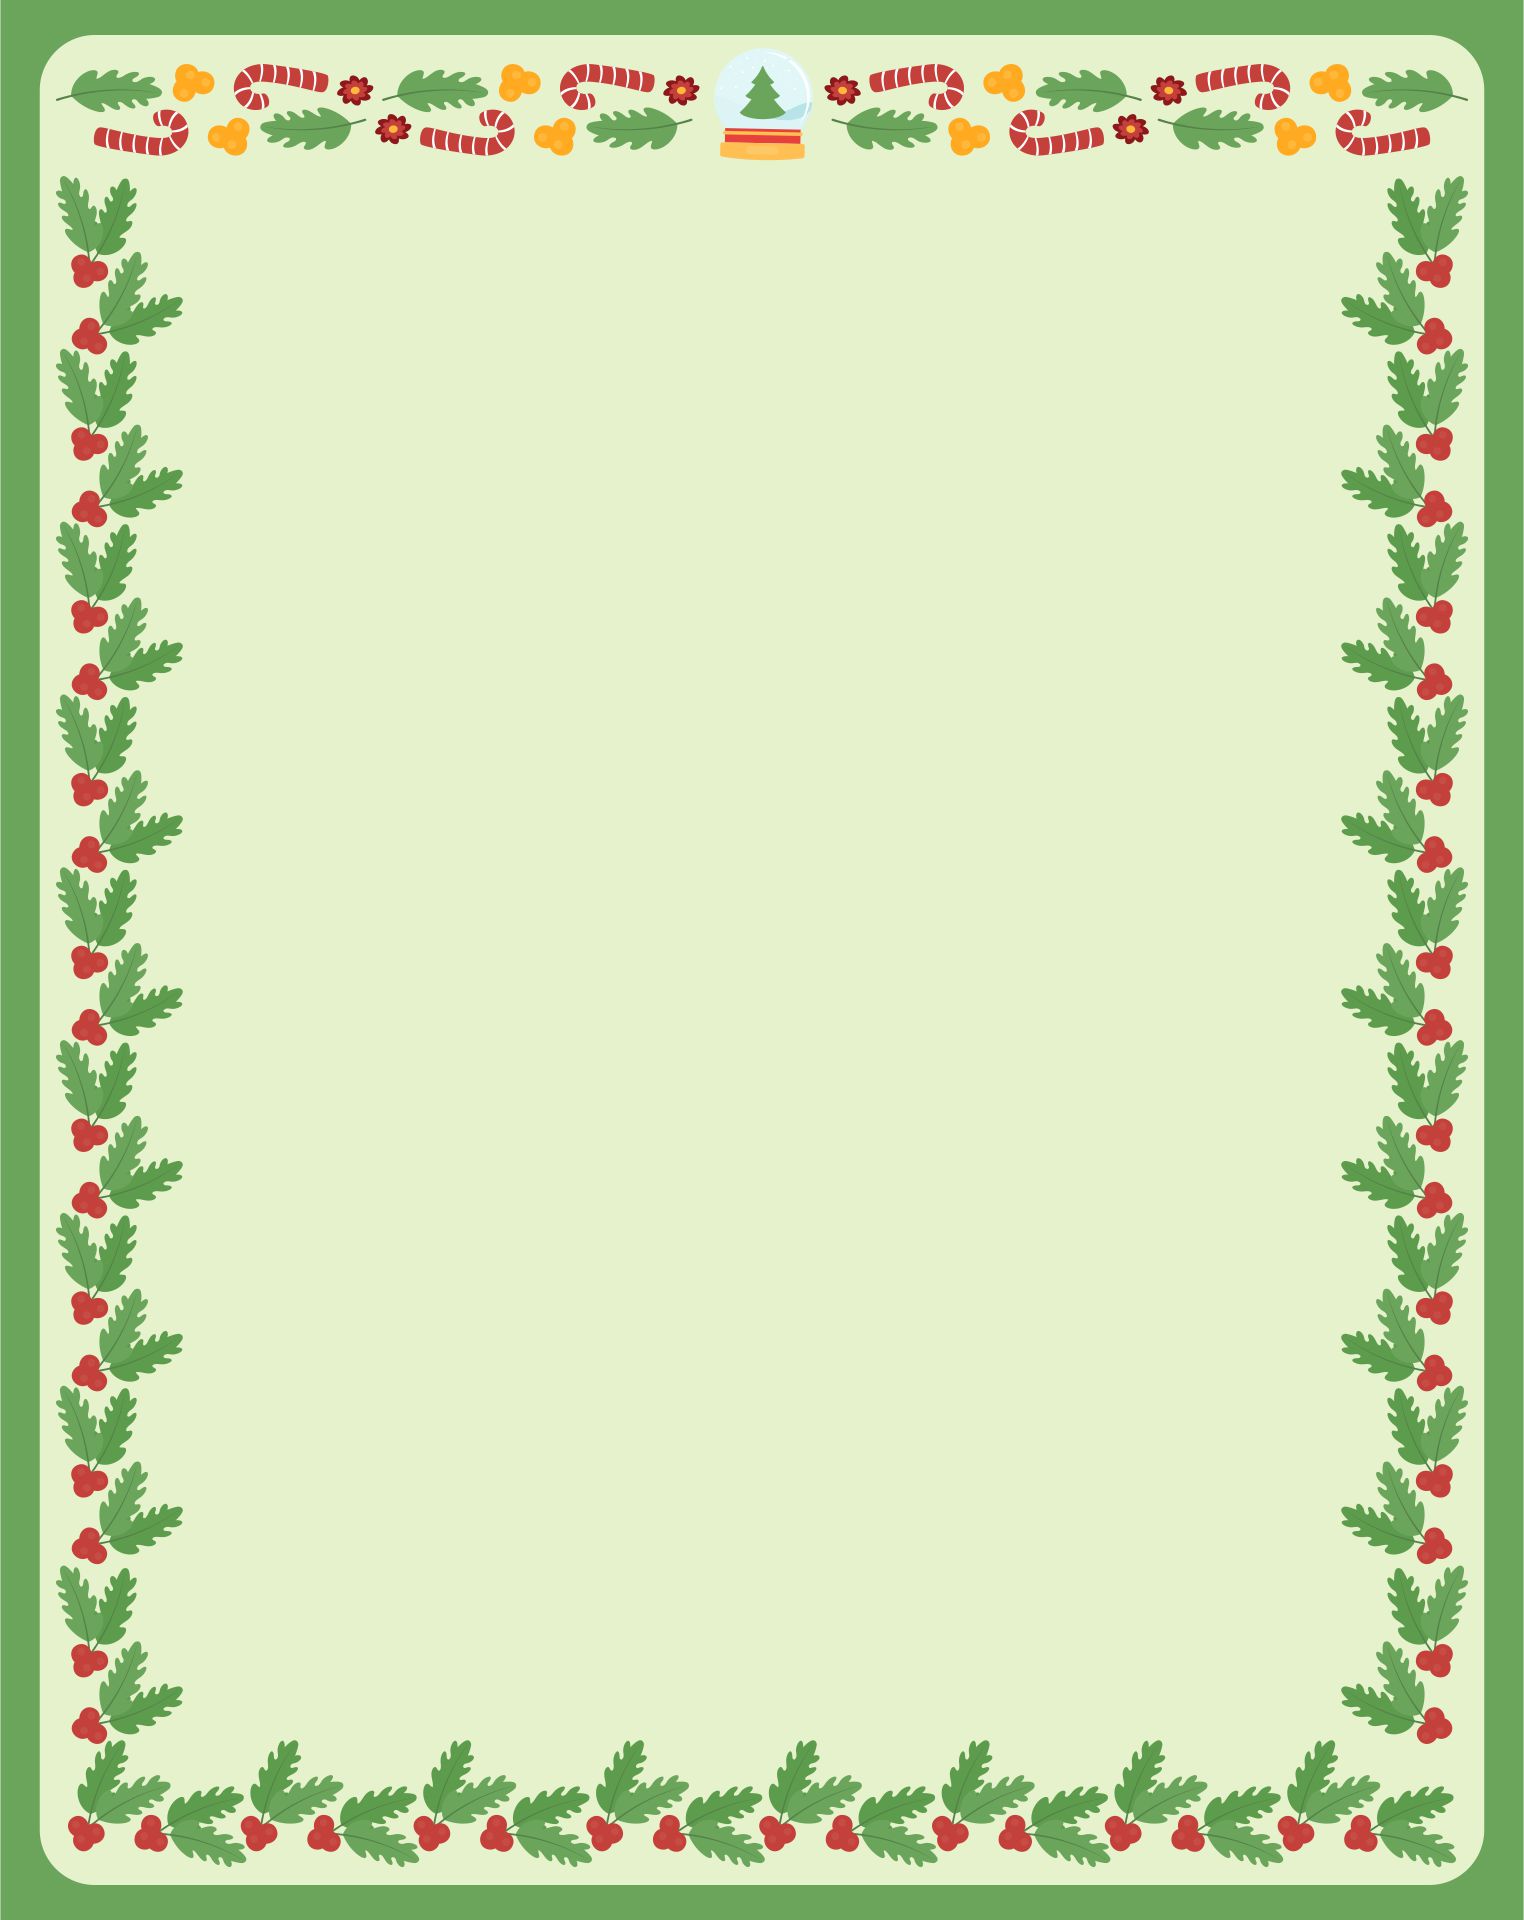 15-best-free-printable-christmas-borders-for-flyers-pdf-for-free-at-printablee